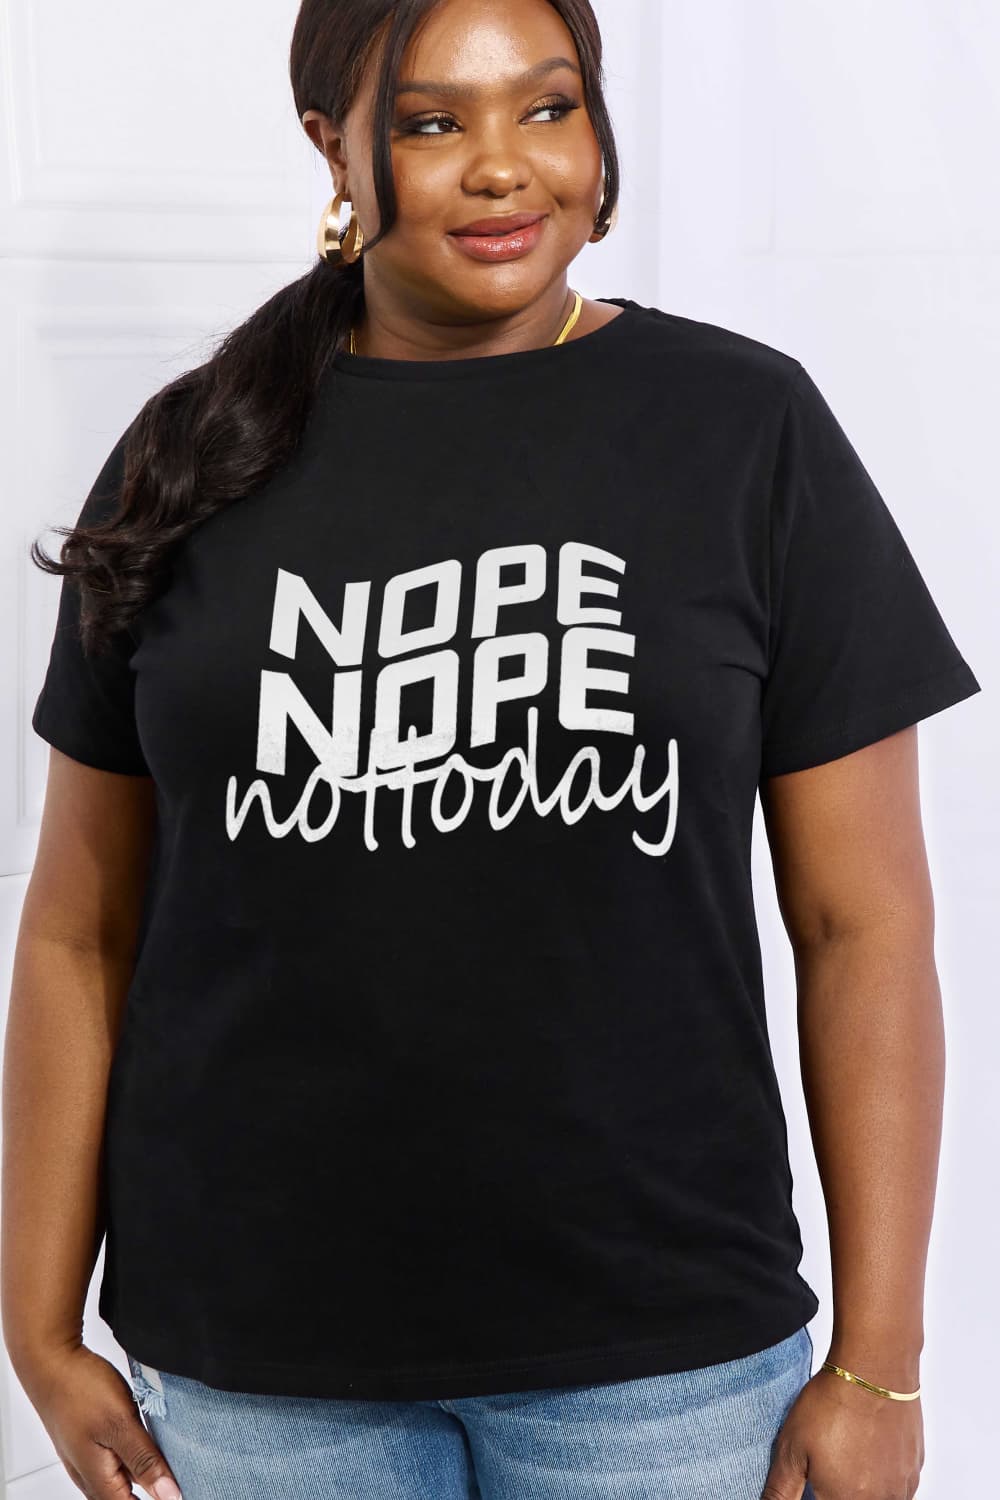 NOPE NOPE NOT TODAY Graphic Cotton Tee - Black / S - T-Shirts - Shirts & Tops - 7 - 2024